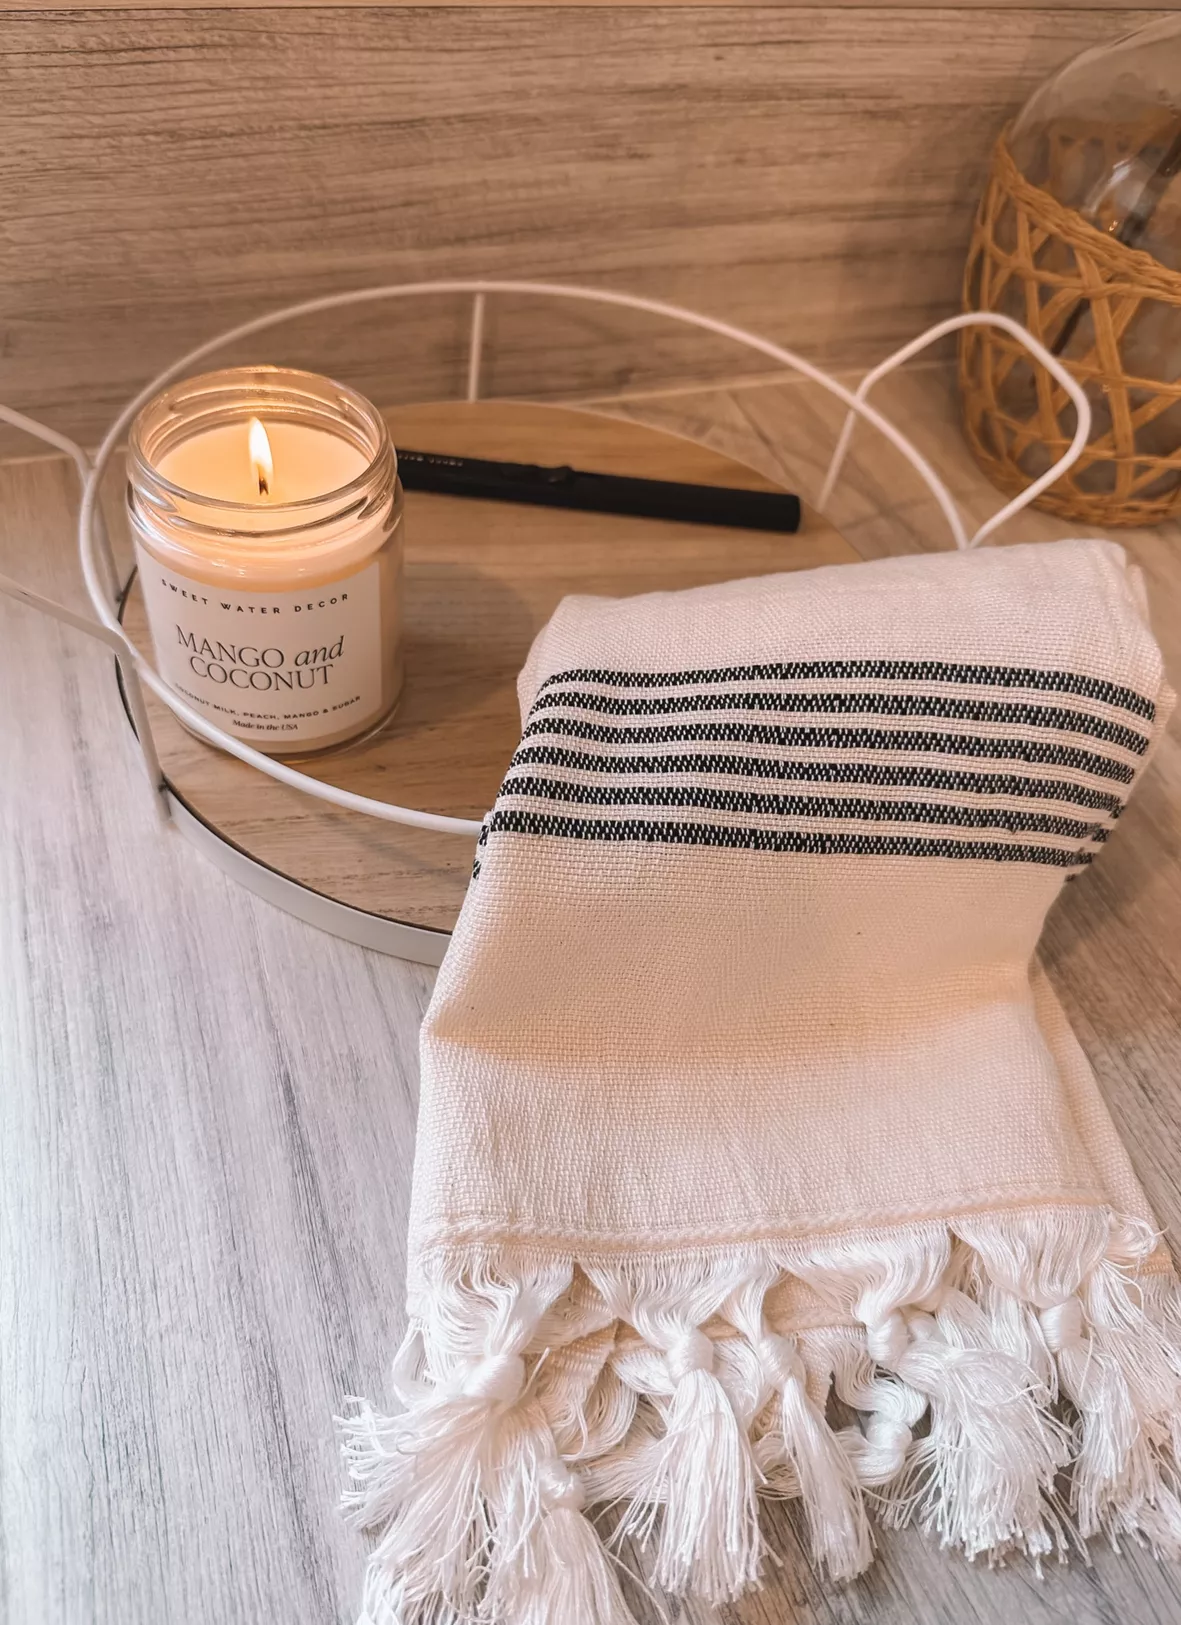 Here's Why I Love These Turkish Hand Towels From